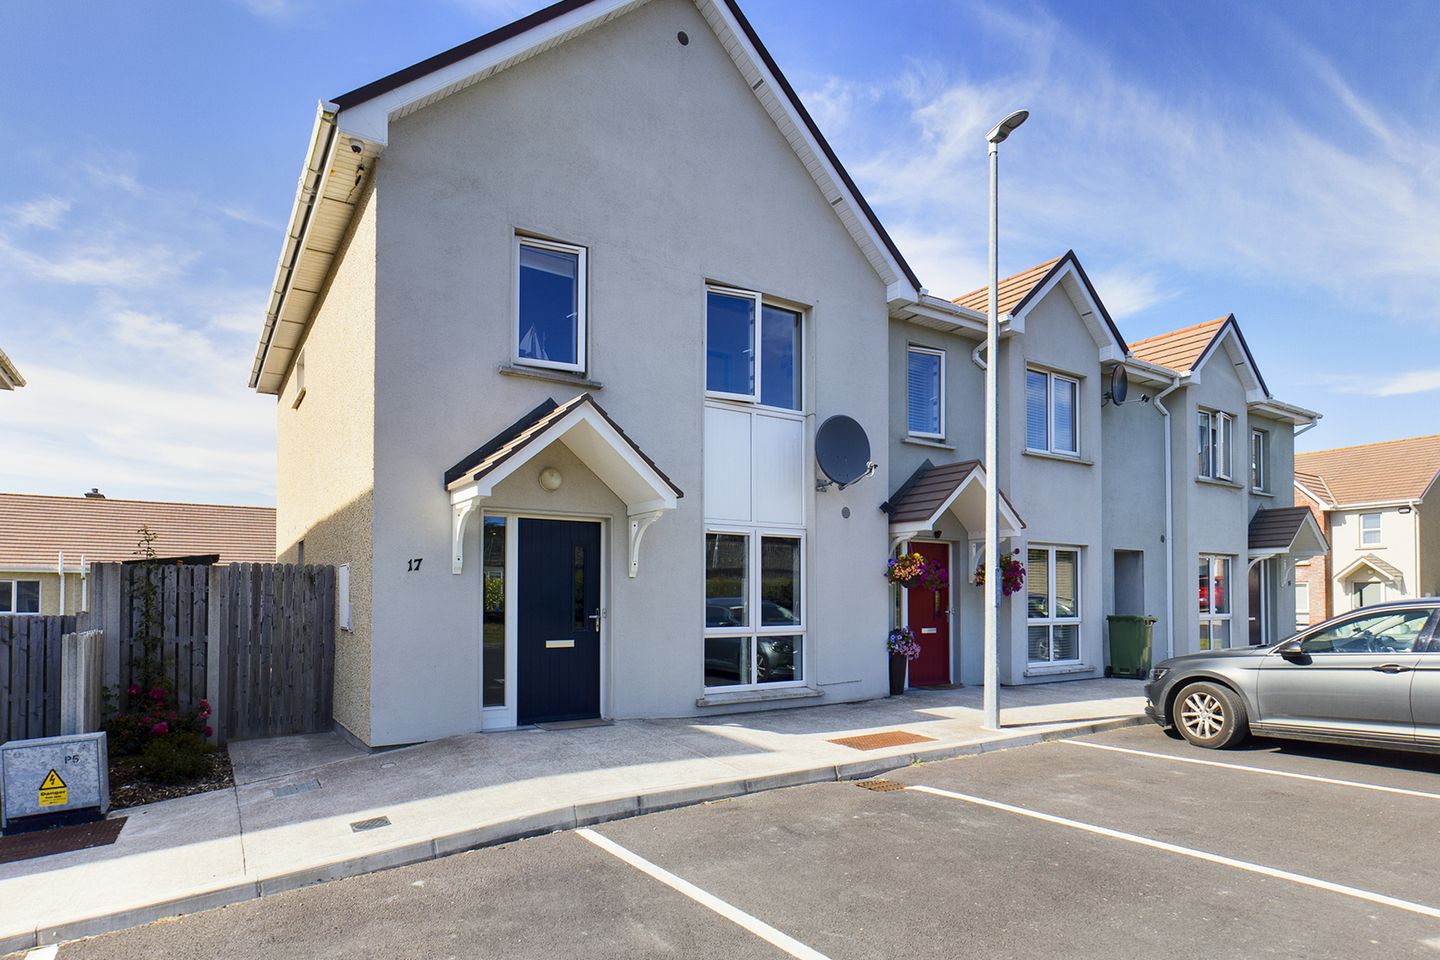 17 Mountfield, Tramore, Co. Waterford